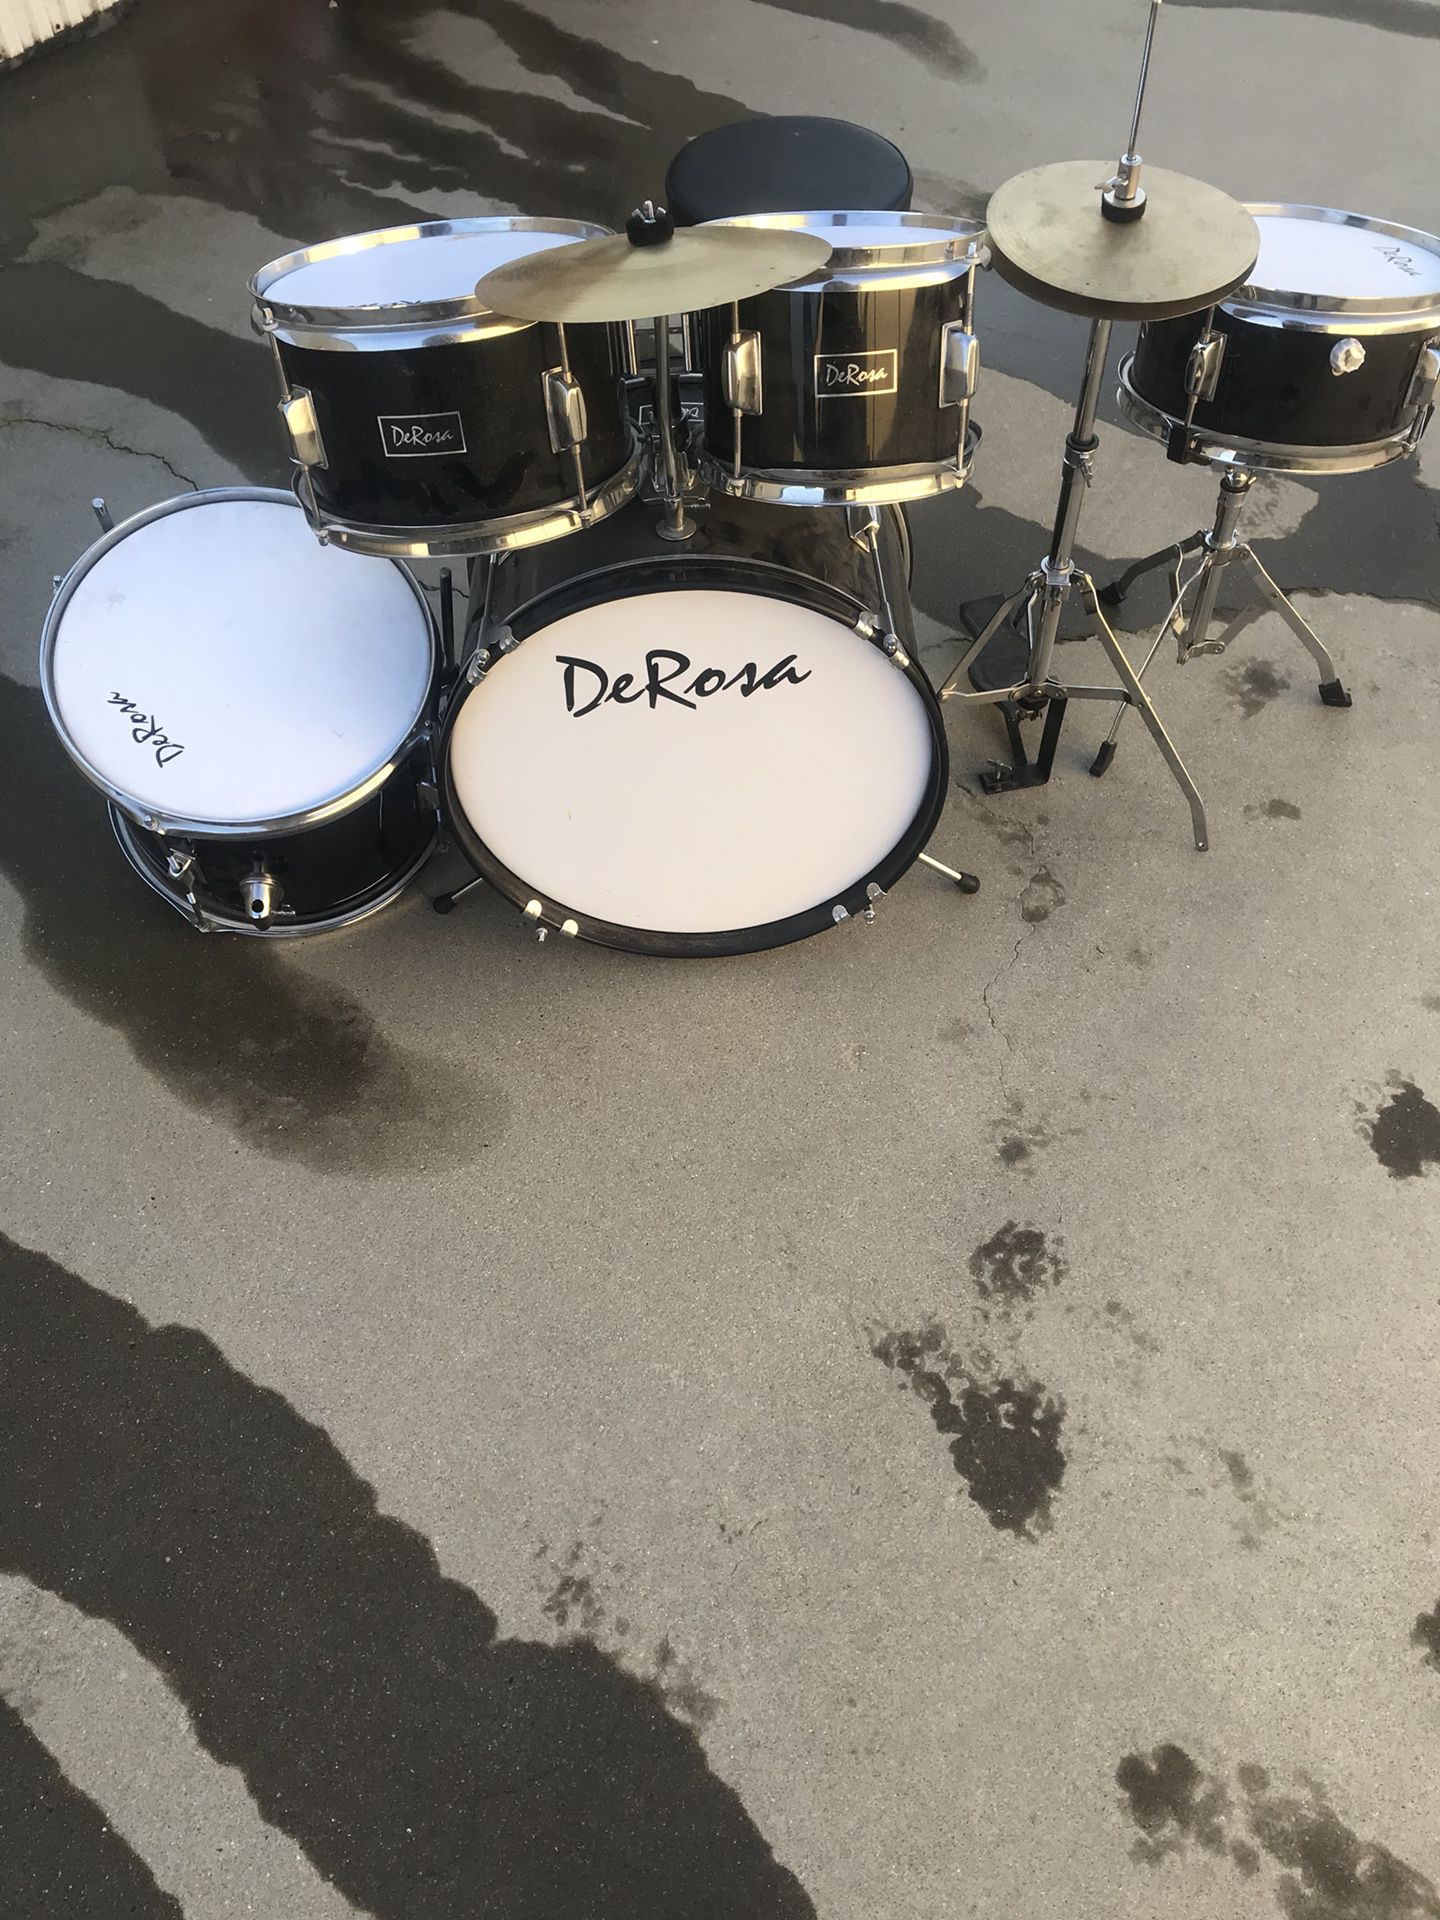 Black youth drum set good condition just dusty comes with chair missing one leg off large drum not necessary $100 as is Pick up only